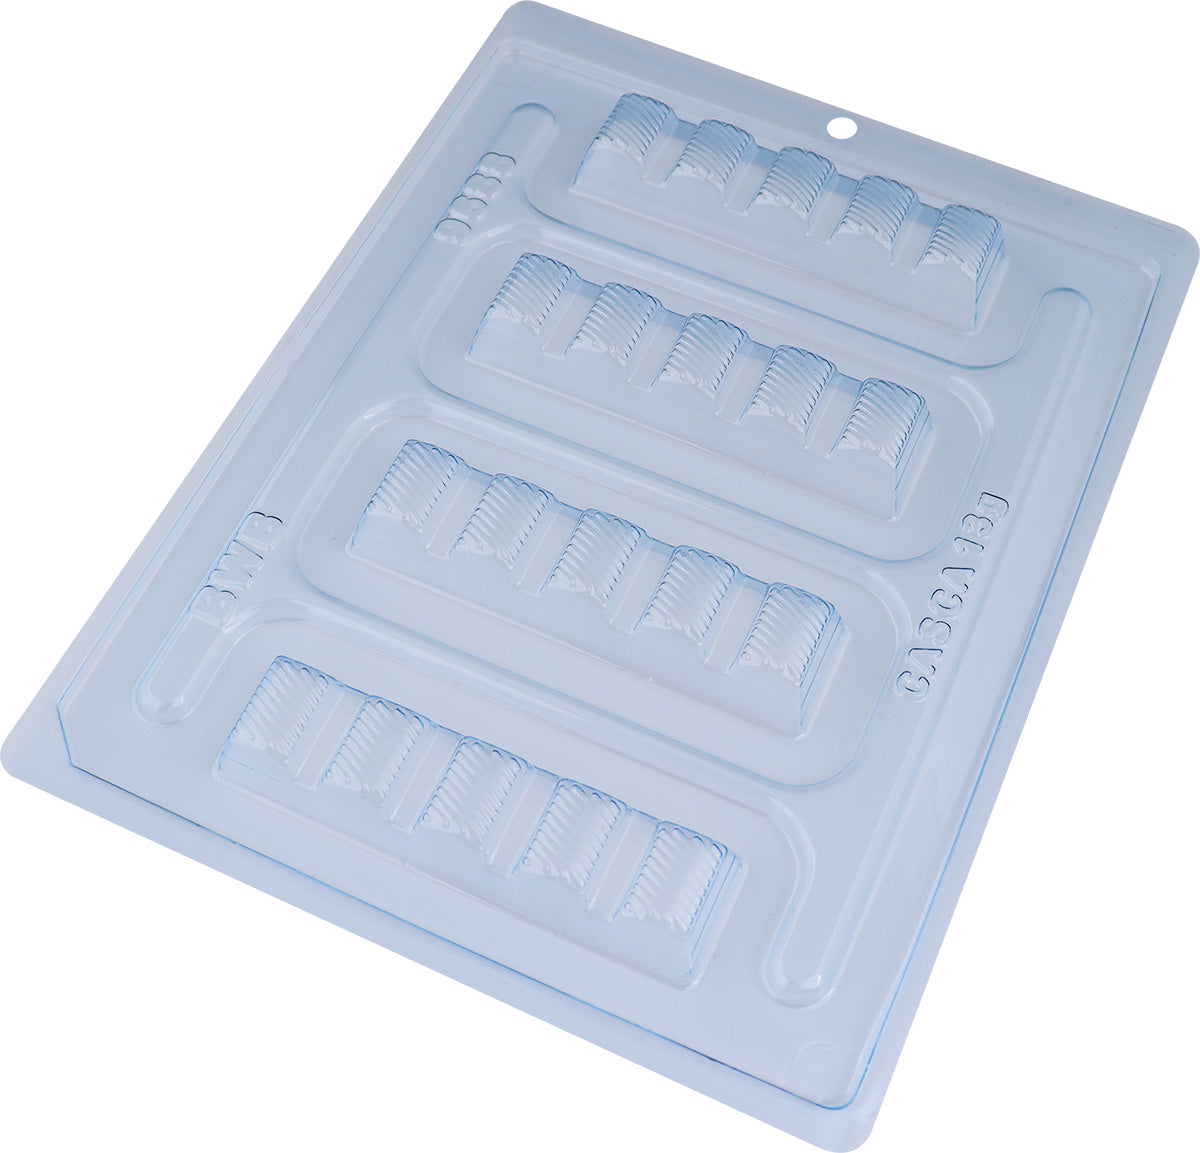 BAR Tablet Chocolate Mould